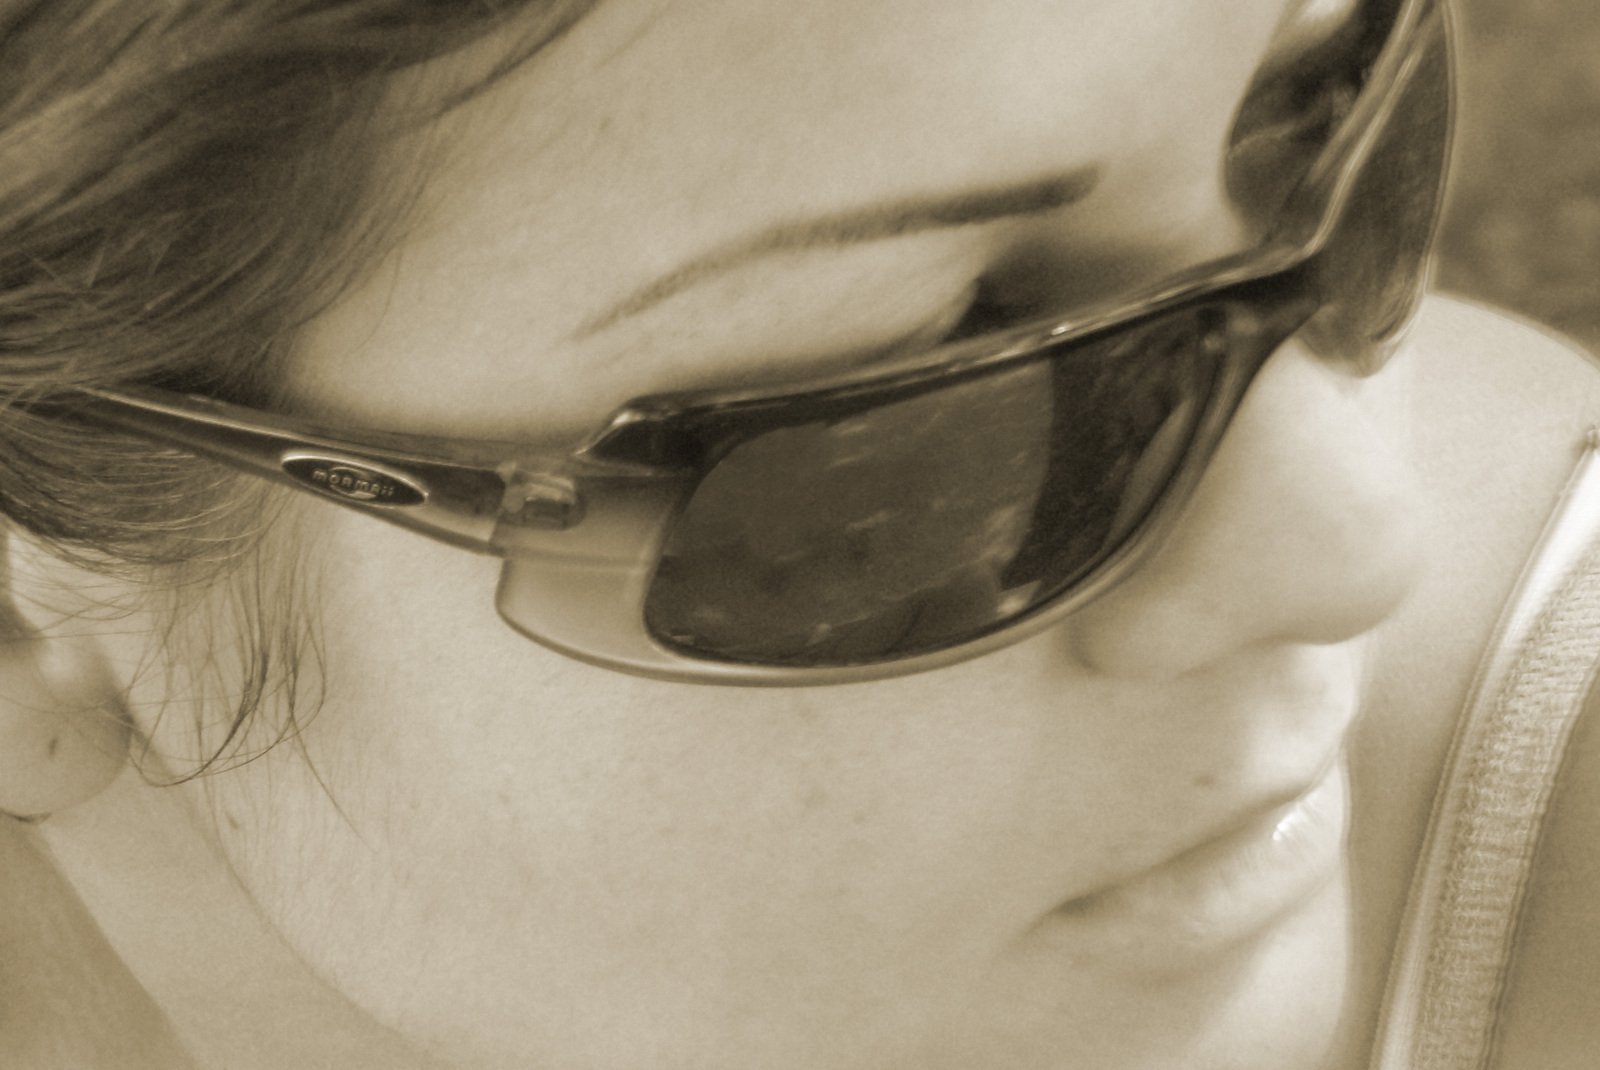 a person in sunglasses using their cell phone